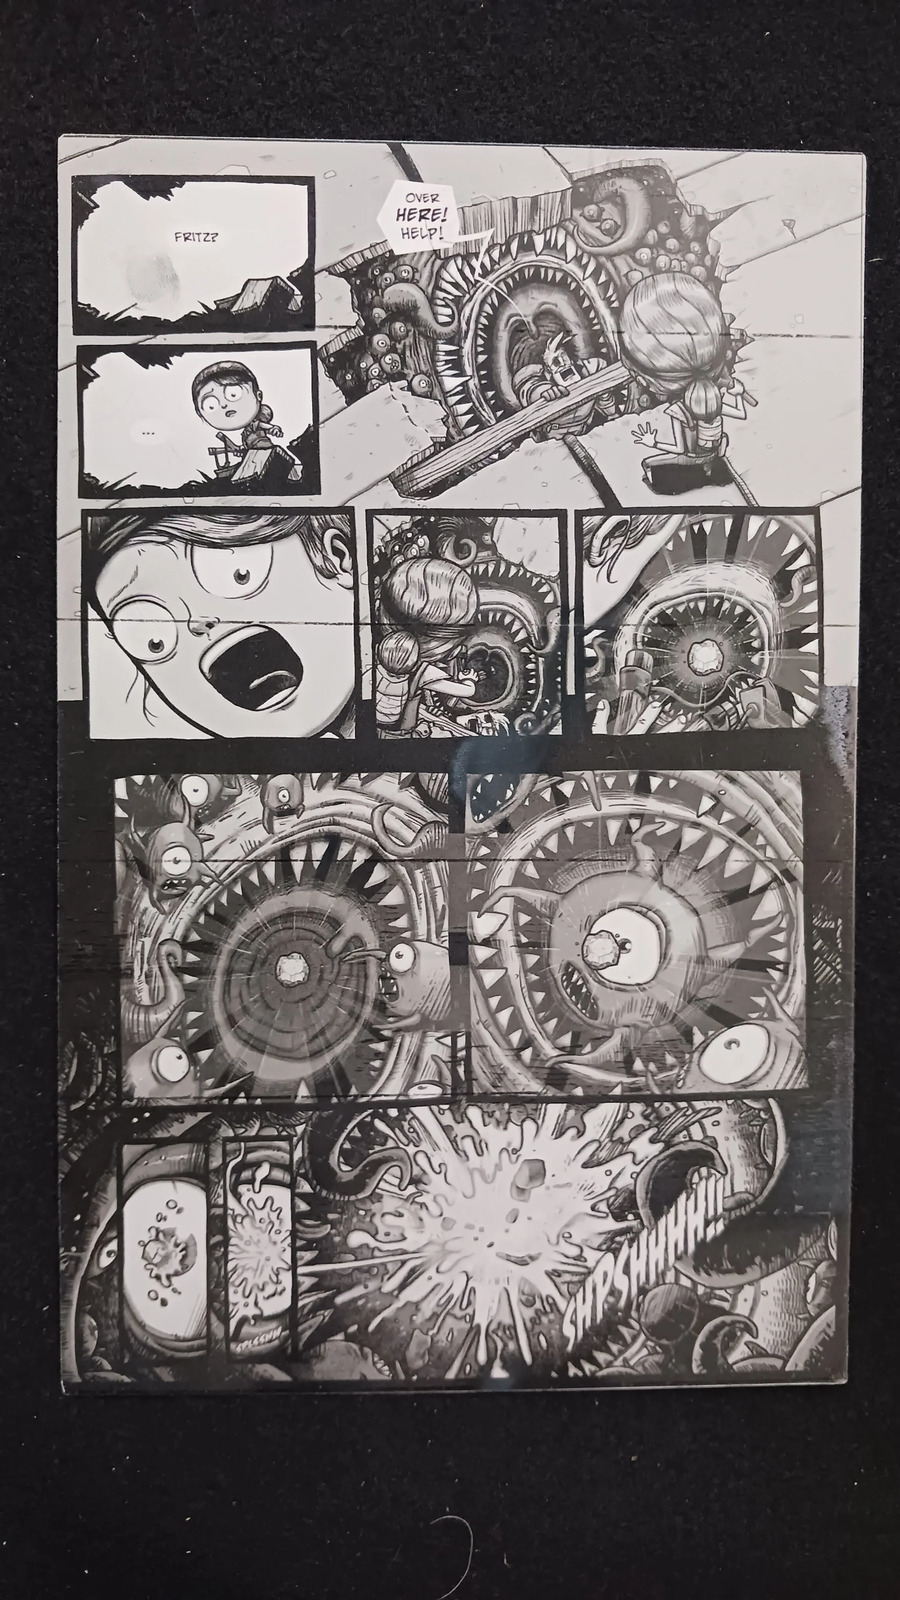 Once Our Land Trade Paperback - Page 58 - PRESSWORKS - Comic Art - Printer Plate